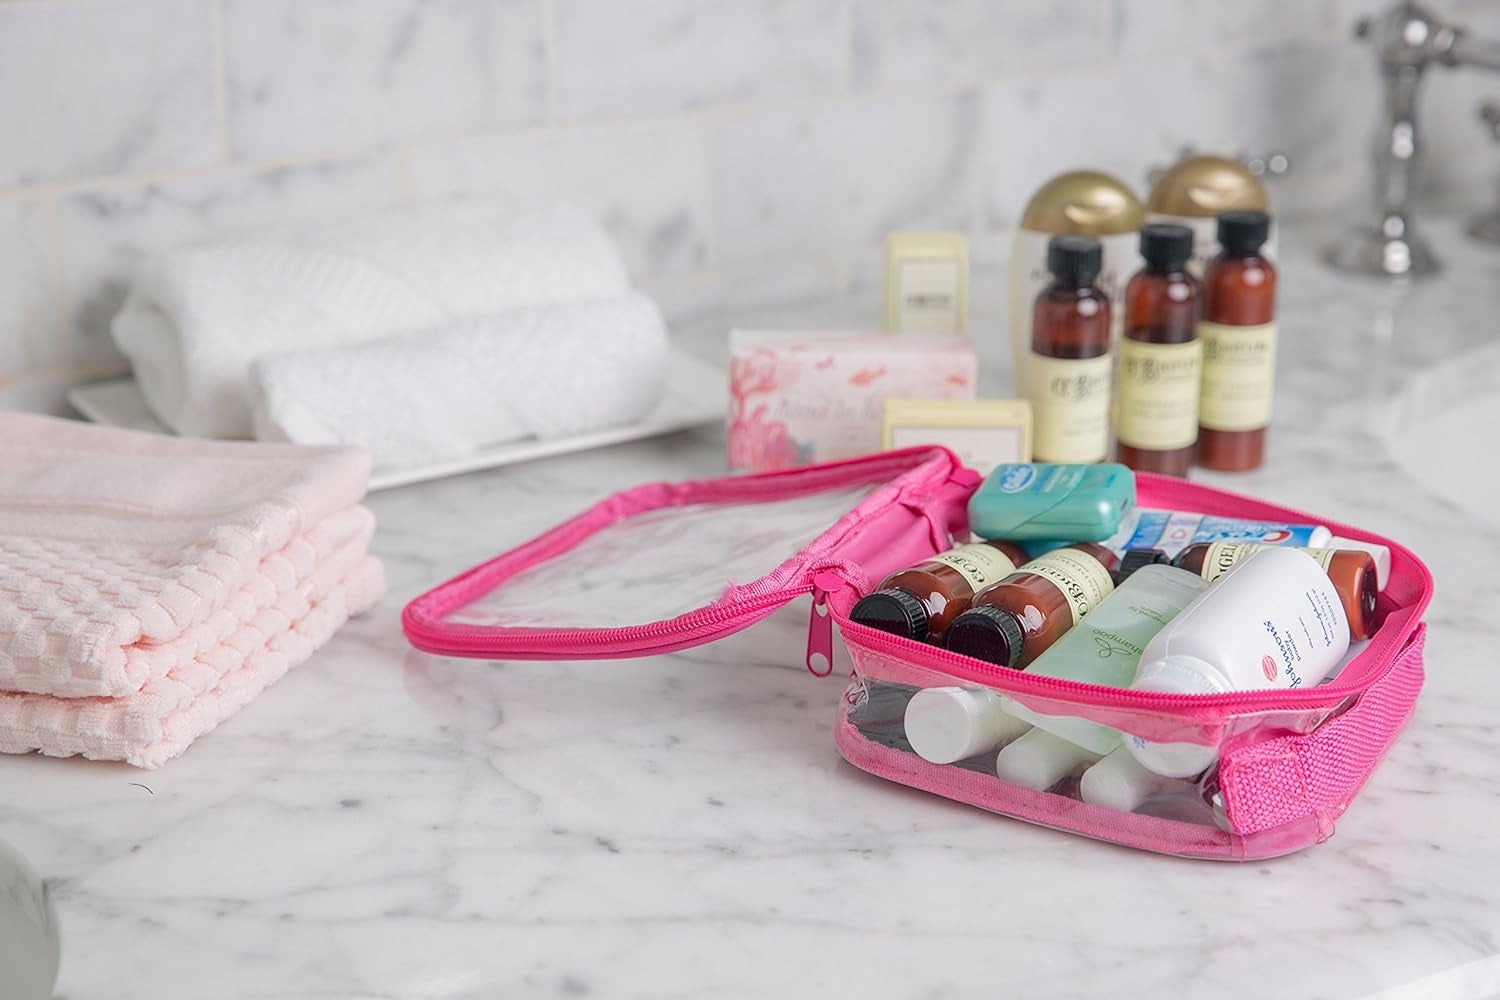 clear bag with toiletries inside